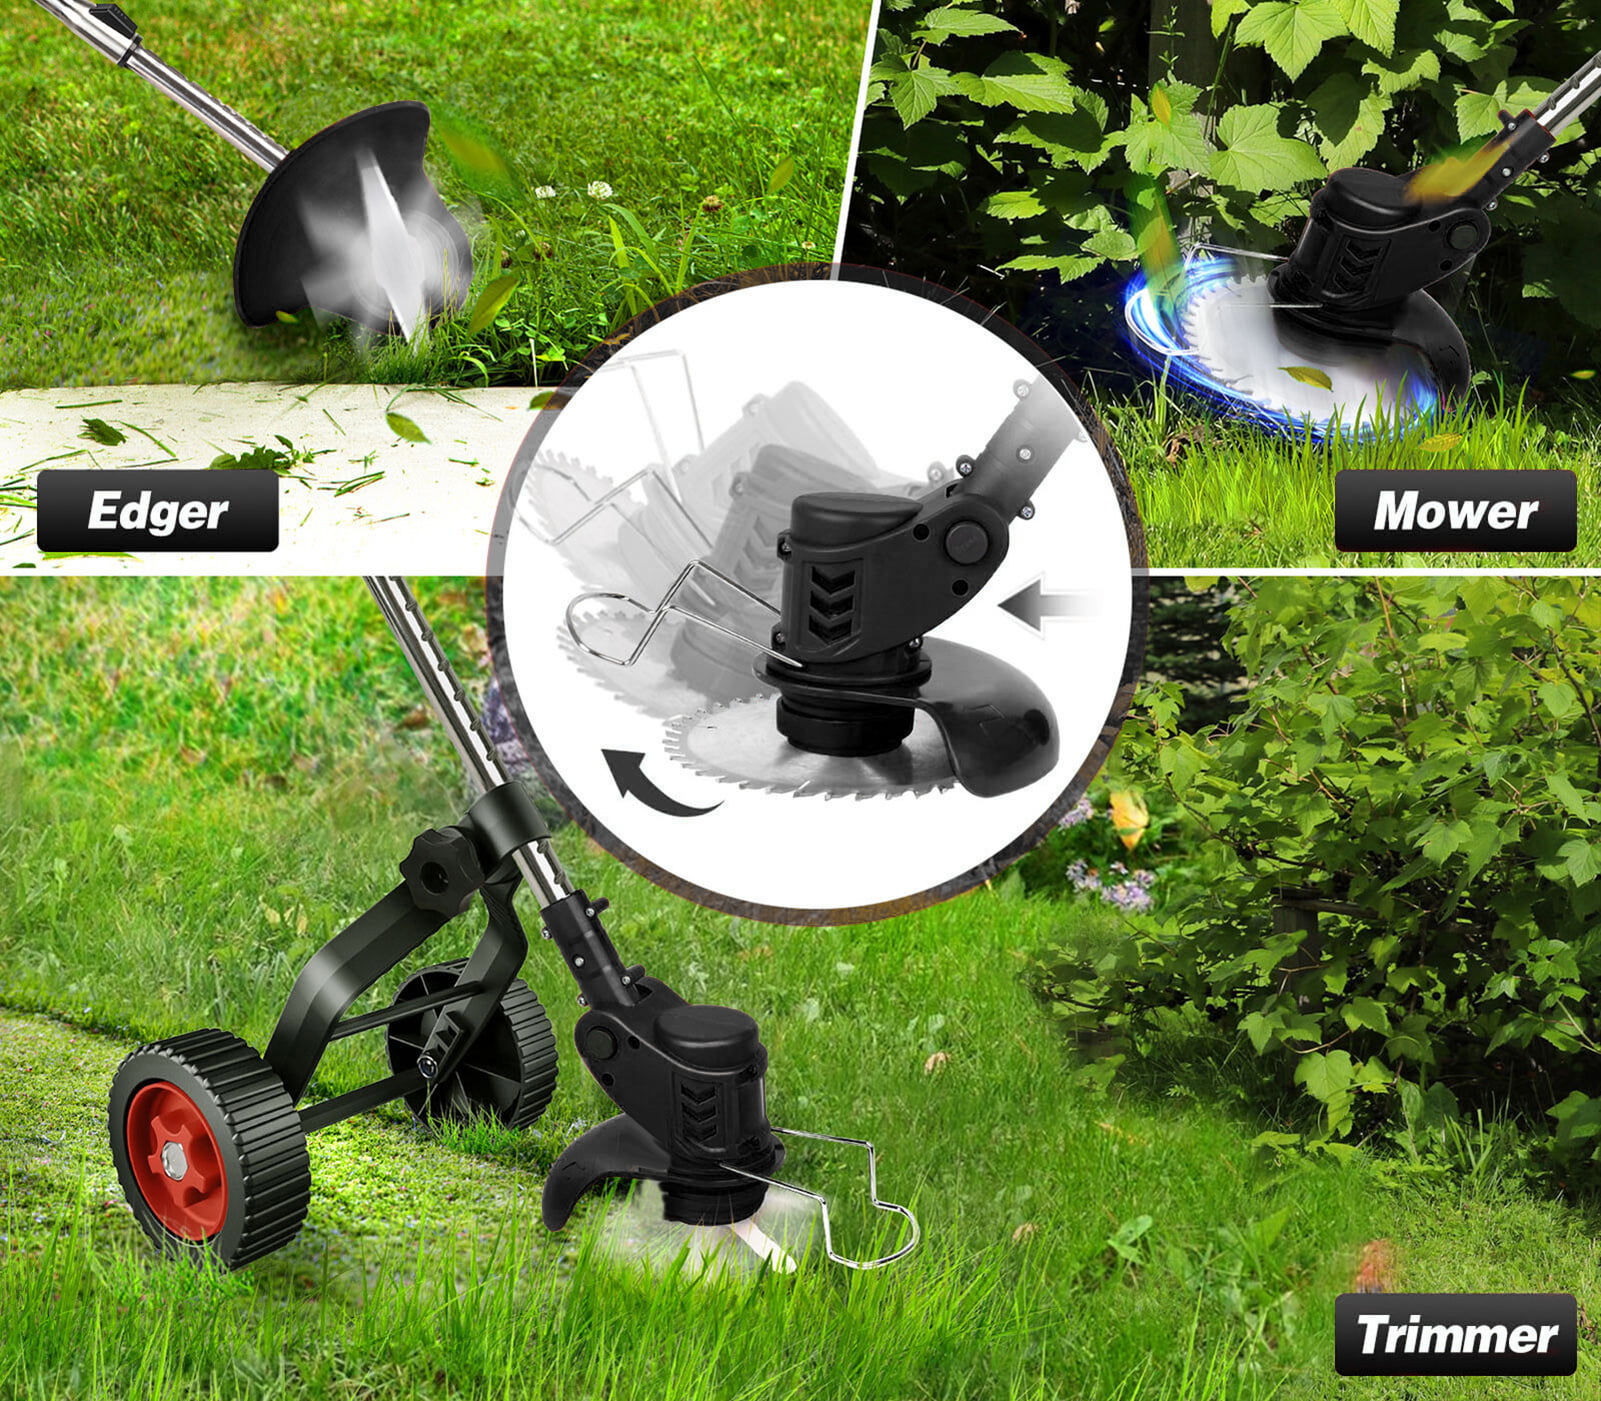 Riguas 2023 String Trimmer with Wheel 21V Electric Lawn Mower 3 in-1 Brush  Cutter Cordless Grass Trimmer 2 Batteries 